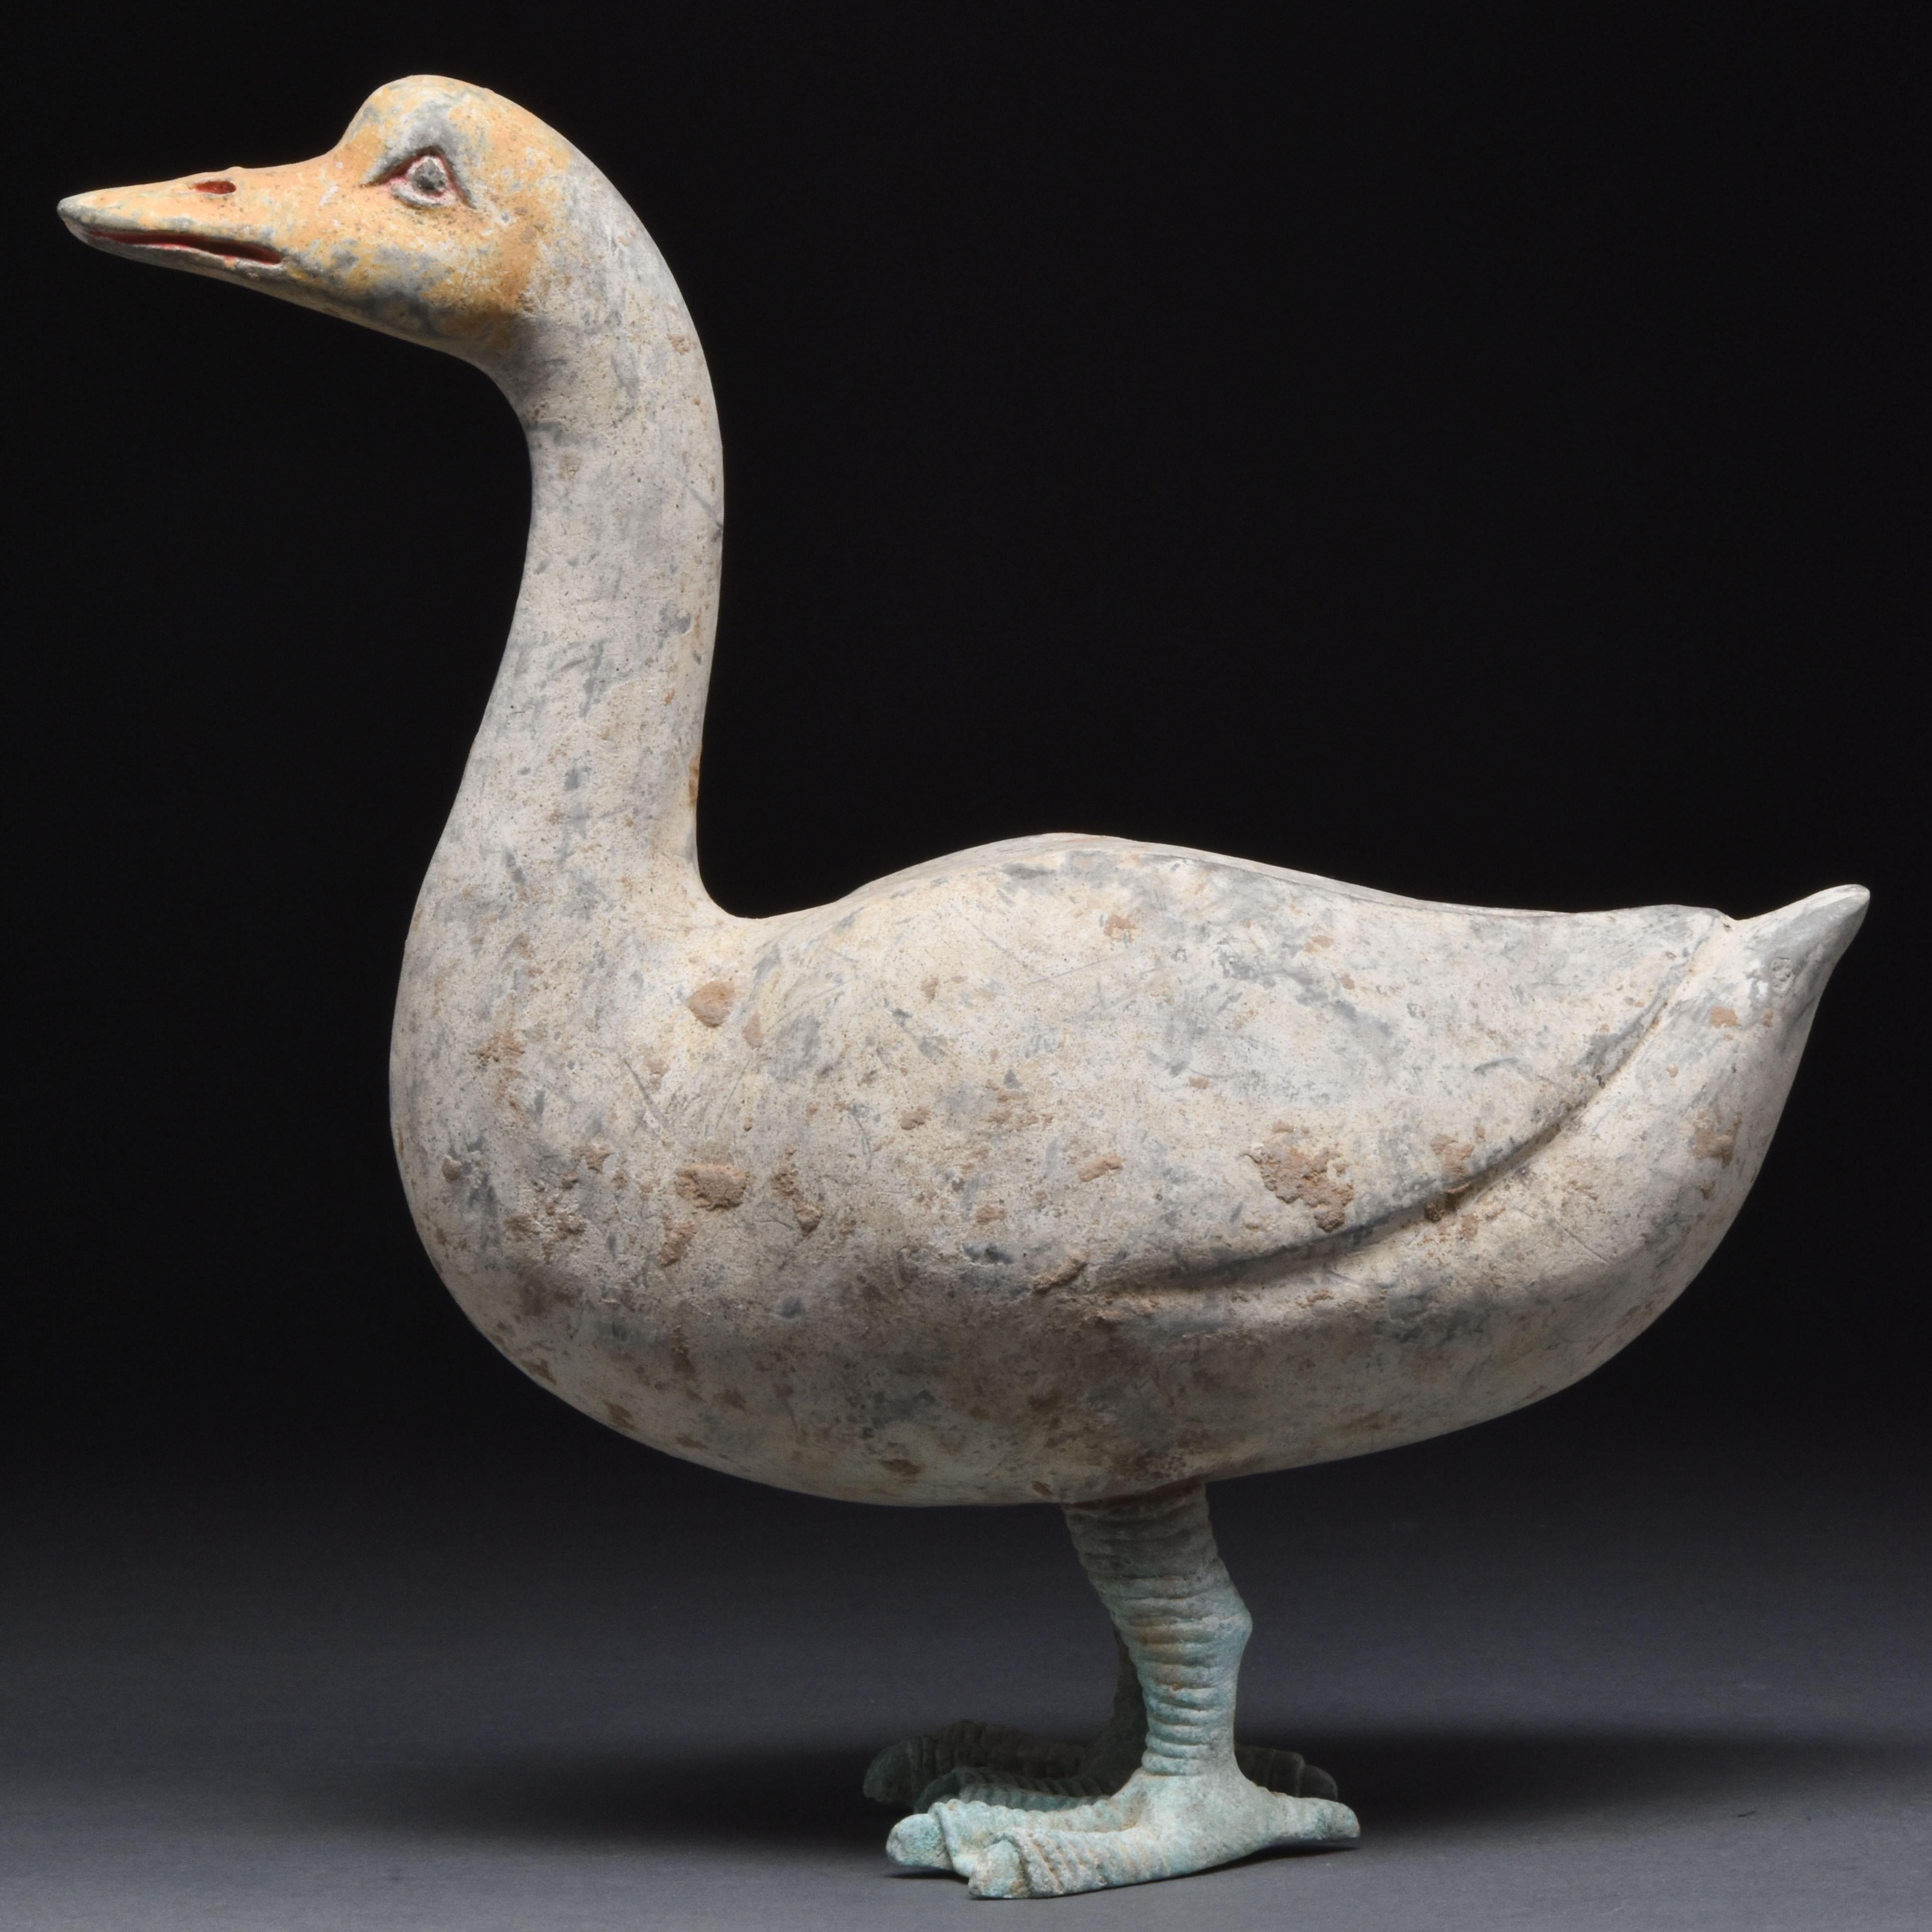 A large ceramic goose standing on its stylised, well-defined bronze legs, which support a white globular body and elegantly slender neck terminating in a yellow-coloured head with a beak and open, attentive eyes. Geese were a significant motif in